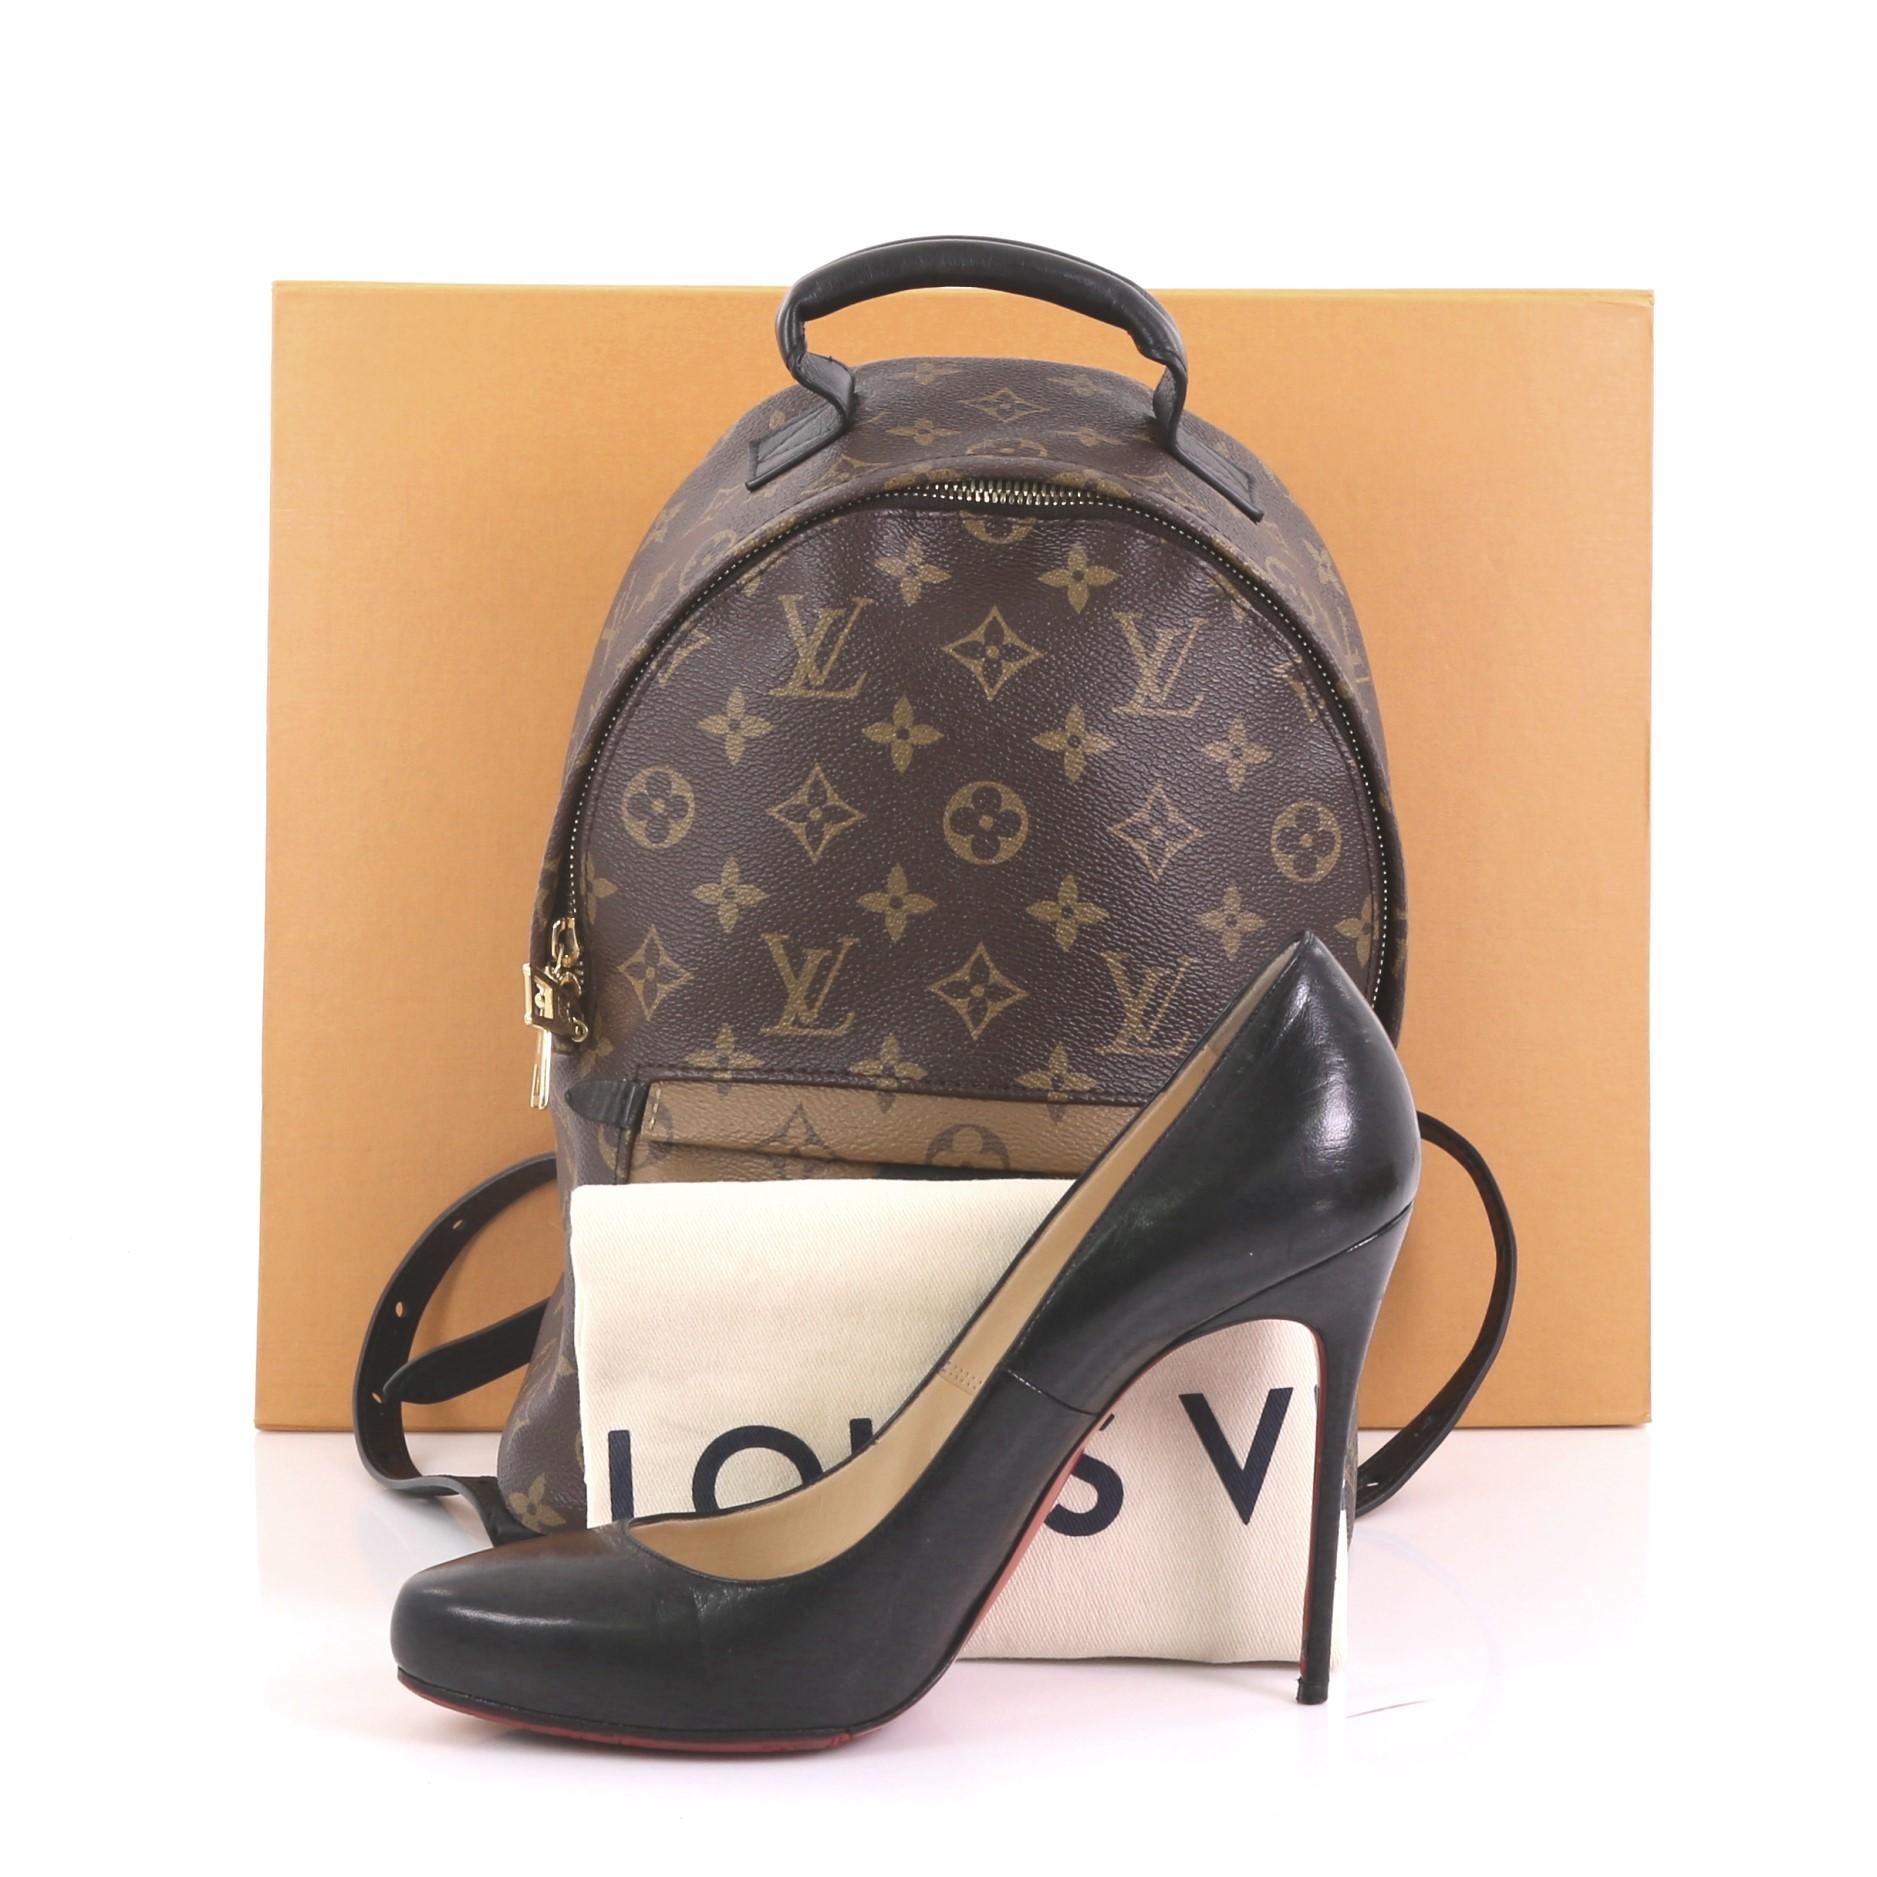 This Louis Vuitton Palm Springs Backpack Reverse Monogram Canvas PM, crafted from brown reverse monogram coated canvas, features padded leather top handle, adjustable shoulder straps, exterior front zip pocket, foam backing, and gold-tone hardware.